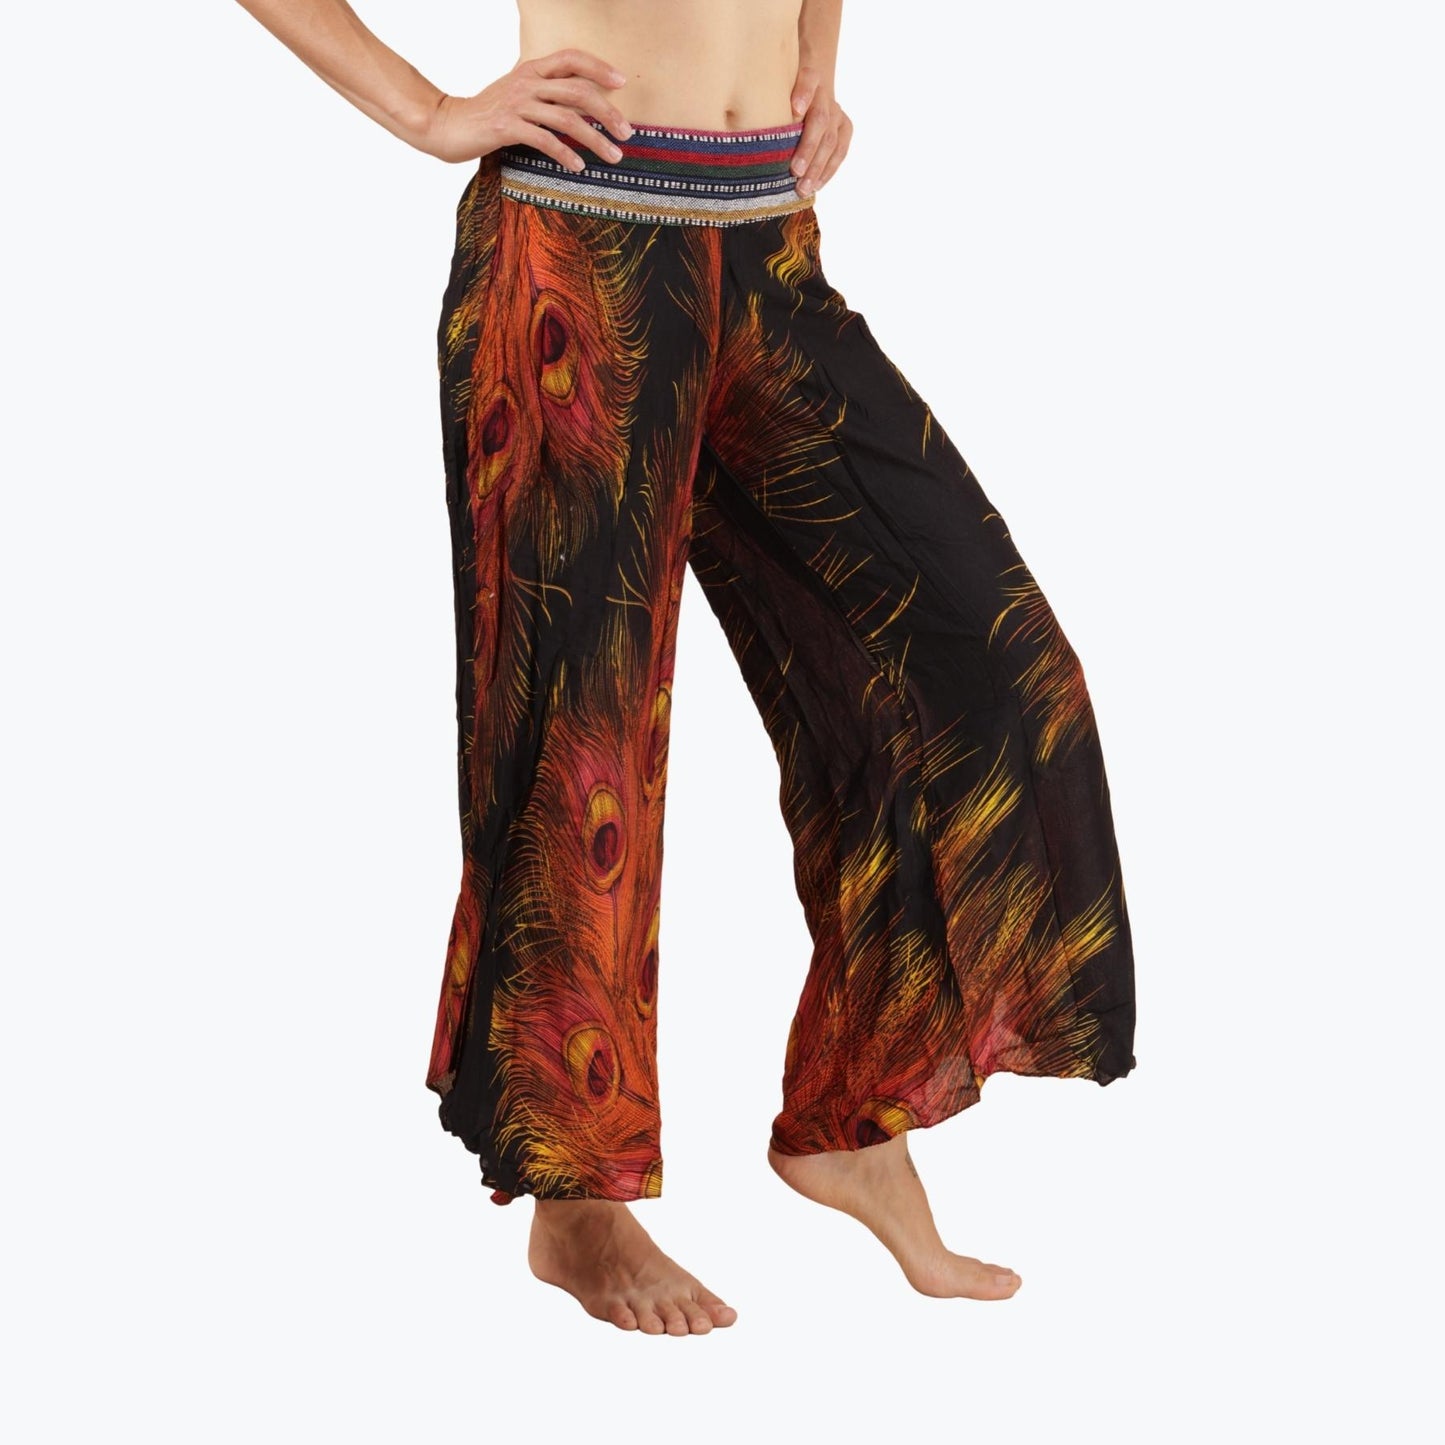 Summer trousers - Cautho